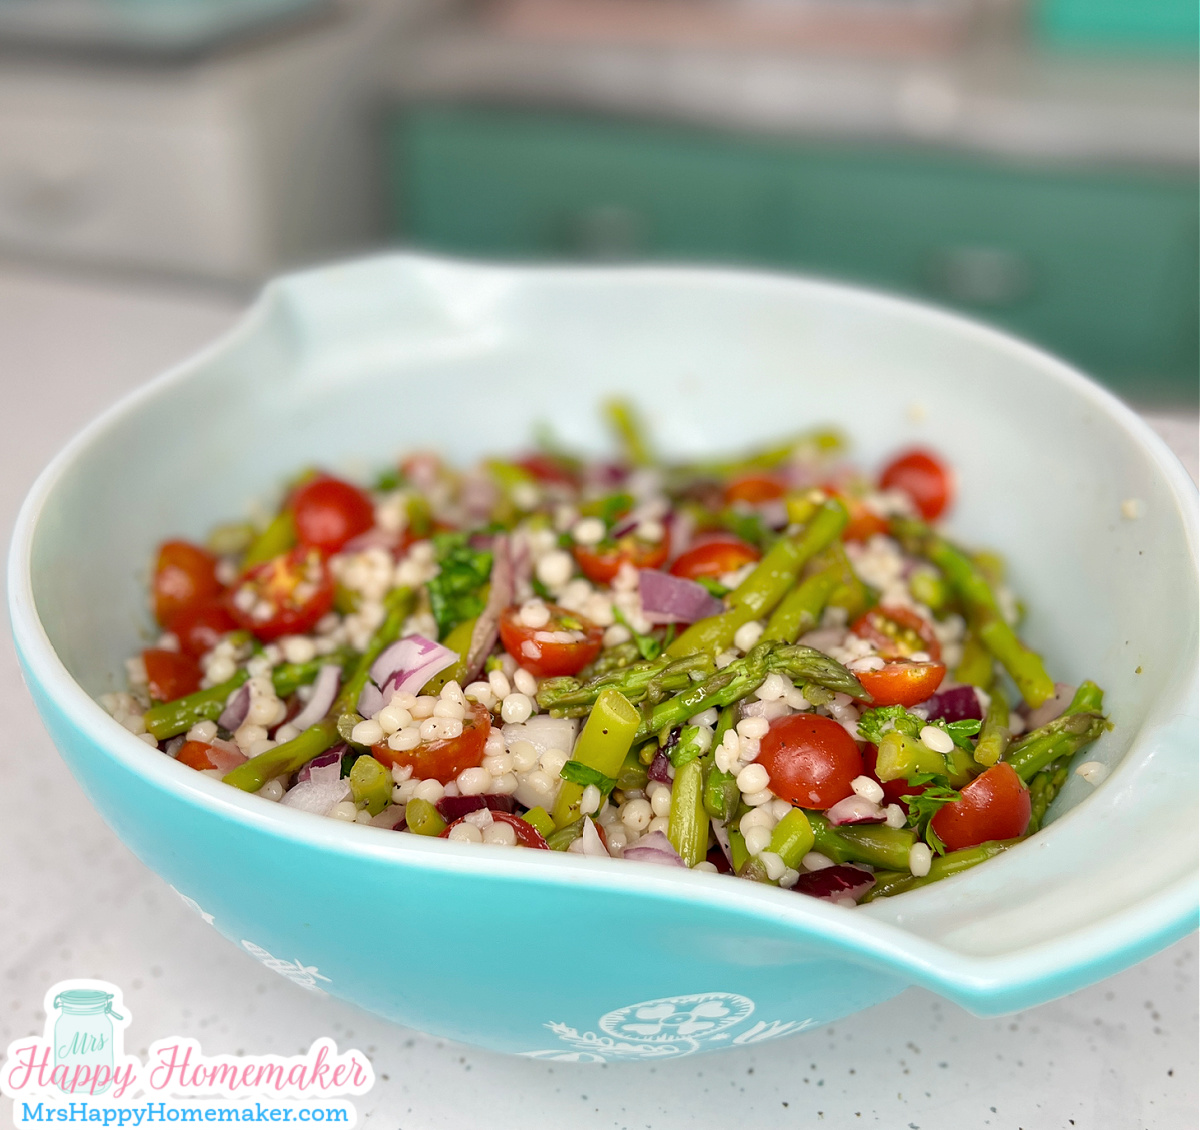 pearl couscous salad with asparagus & cherry tomatoes in a vintage blue Pyrex bowl